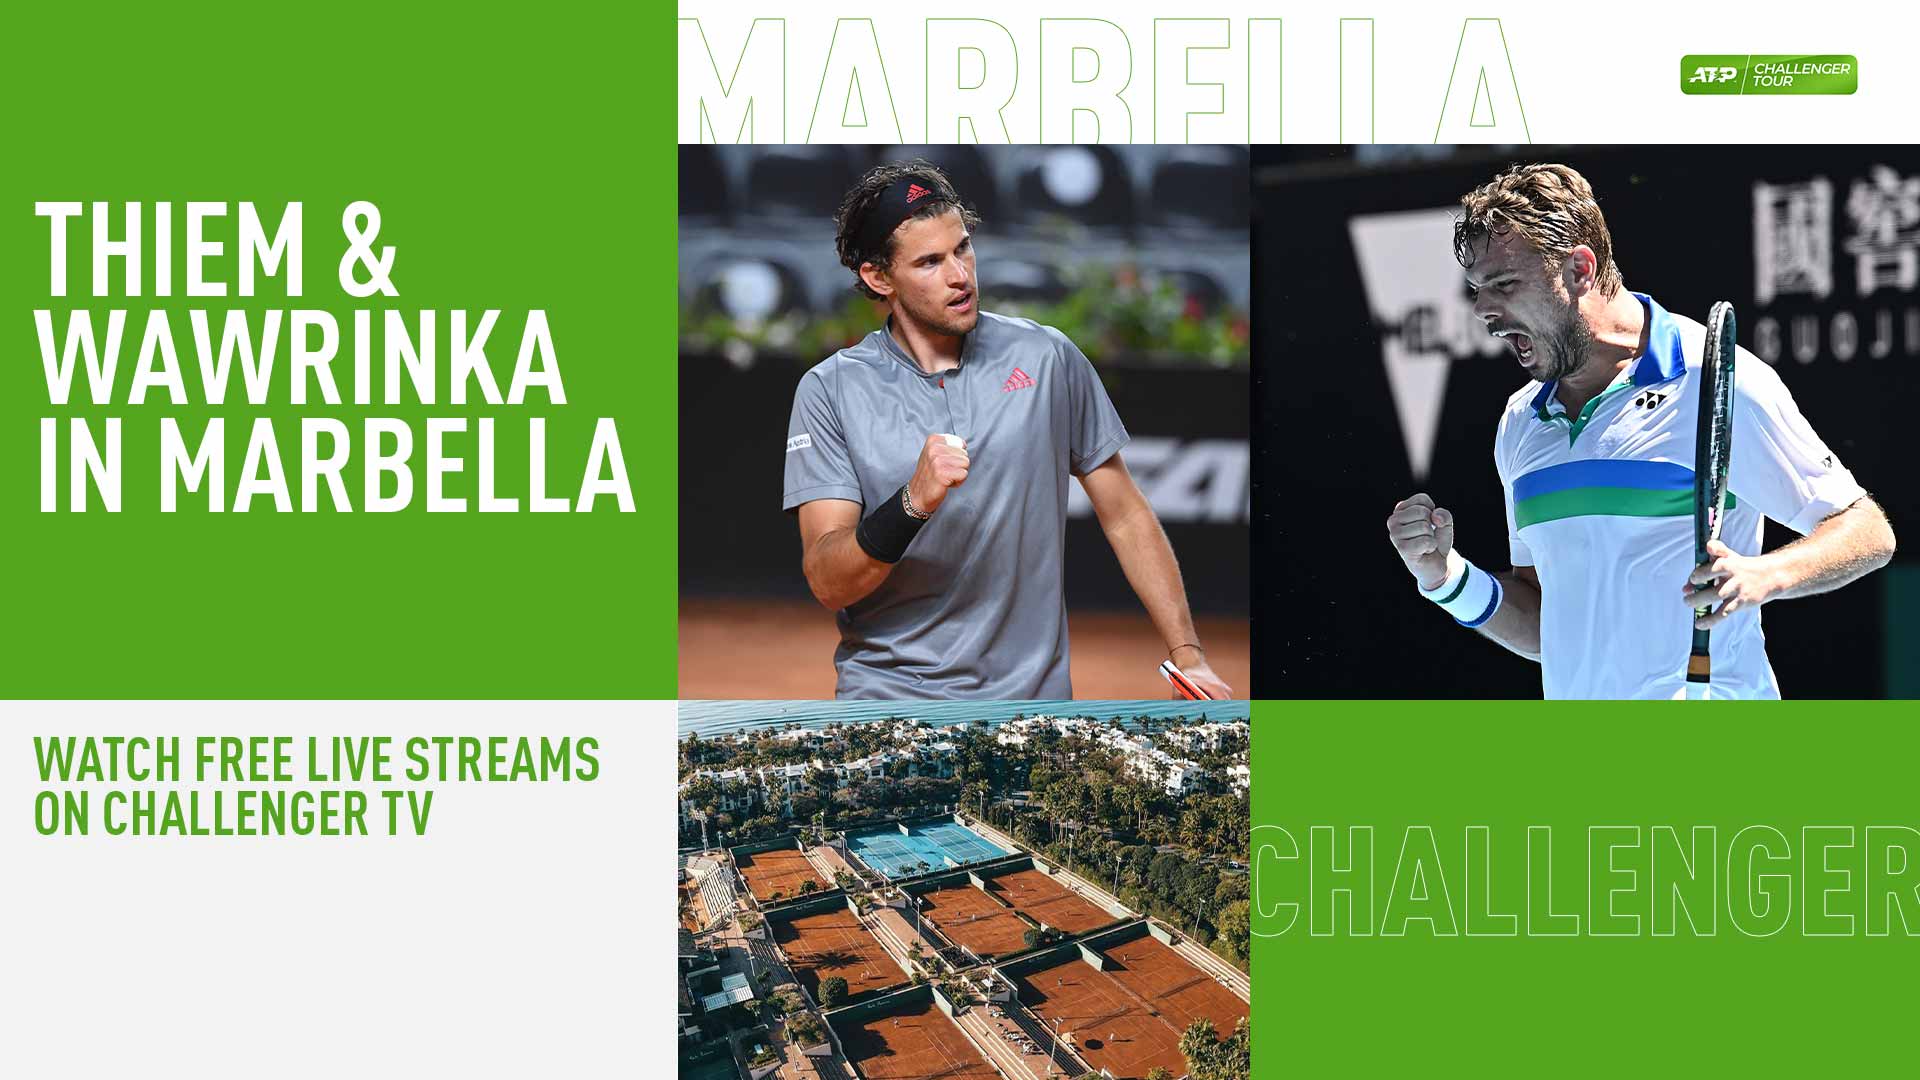 How To Watch Dominic Thiem and Stan Wawrinka Make Their Returns At Marbella Challenger ATP Tour Tennis